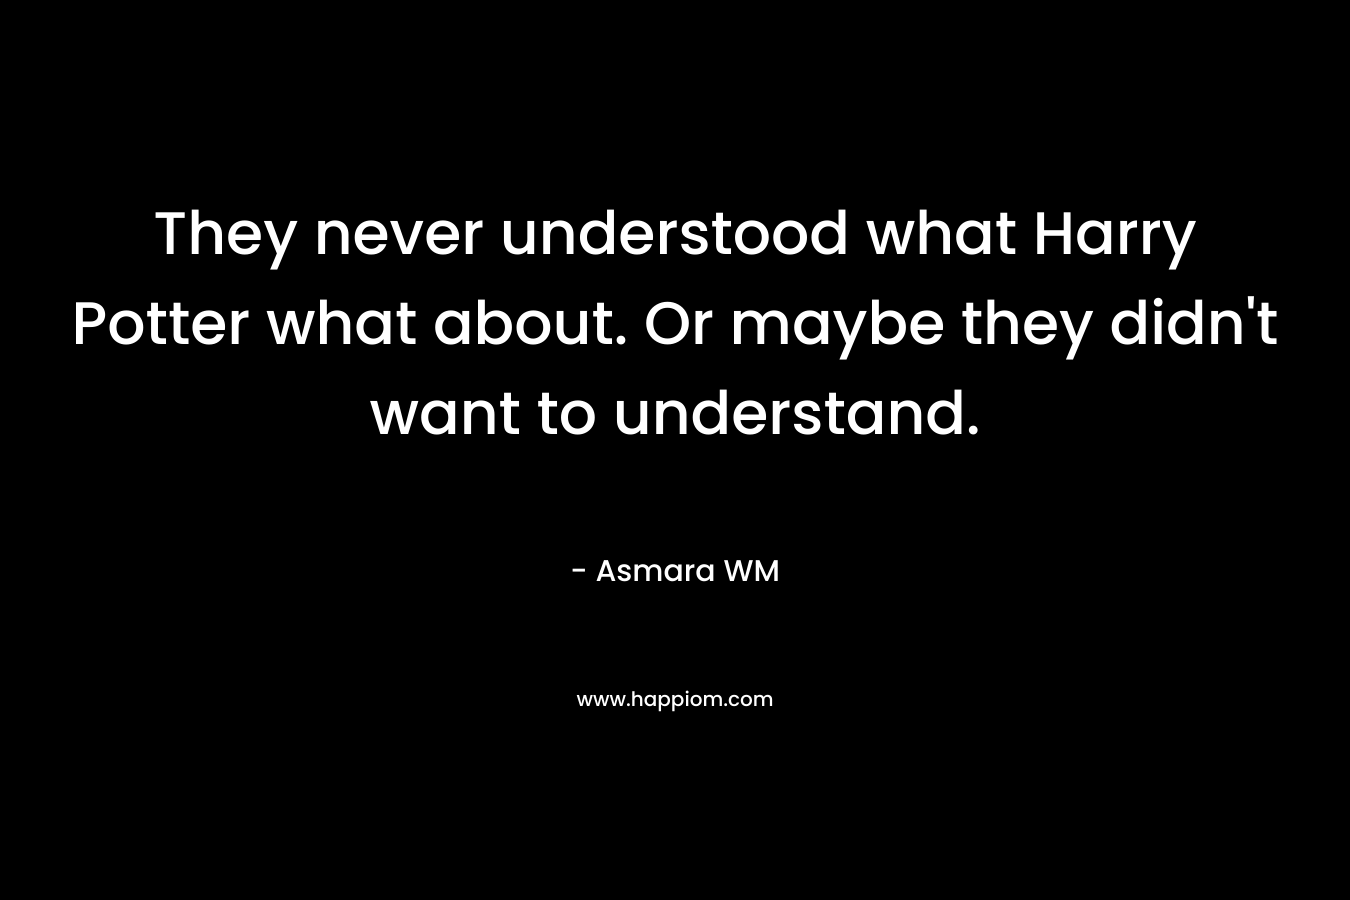 They never understood what Harry Potter what about. Or maybe they didn’t want to understand. – Asmara WM